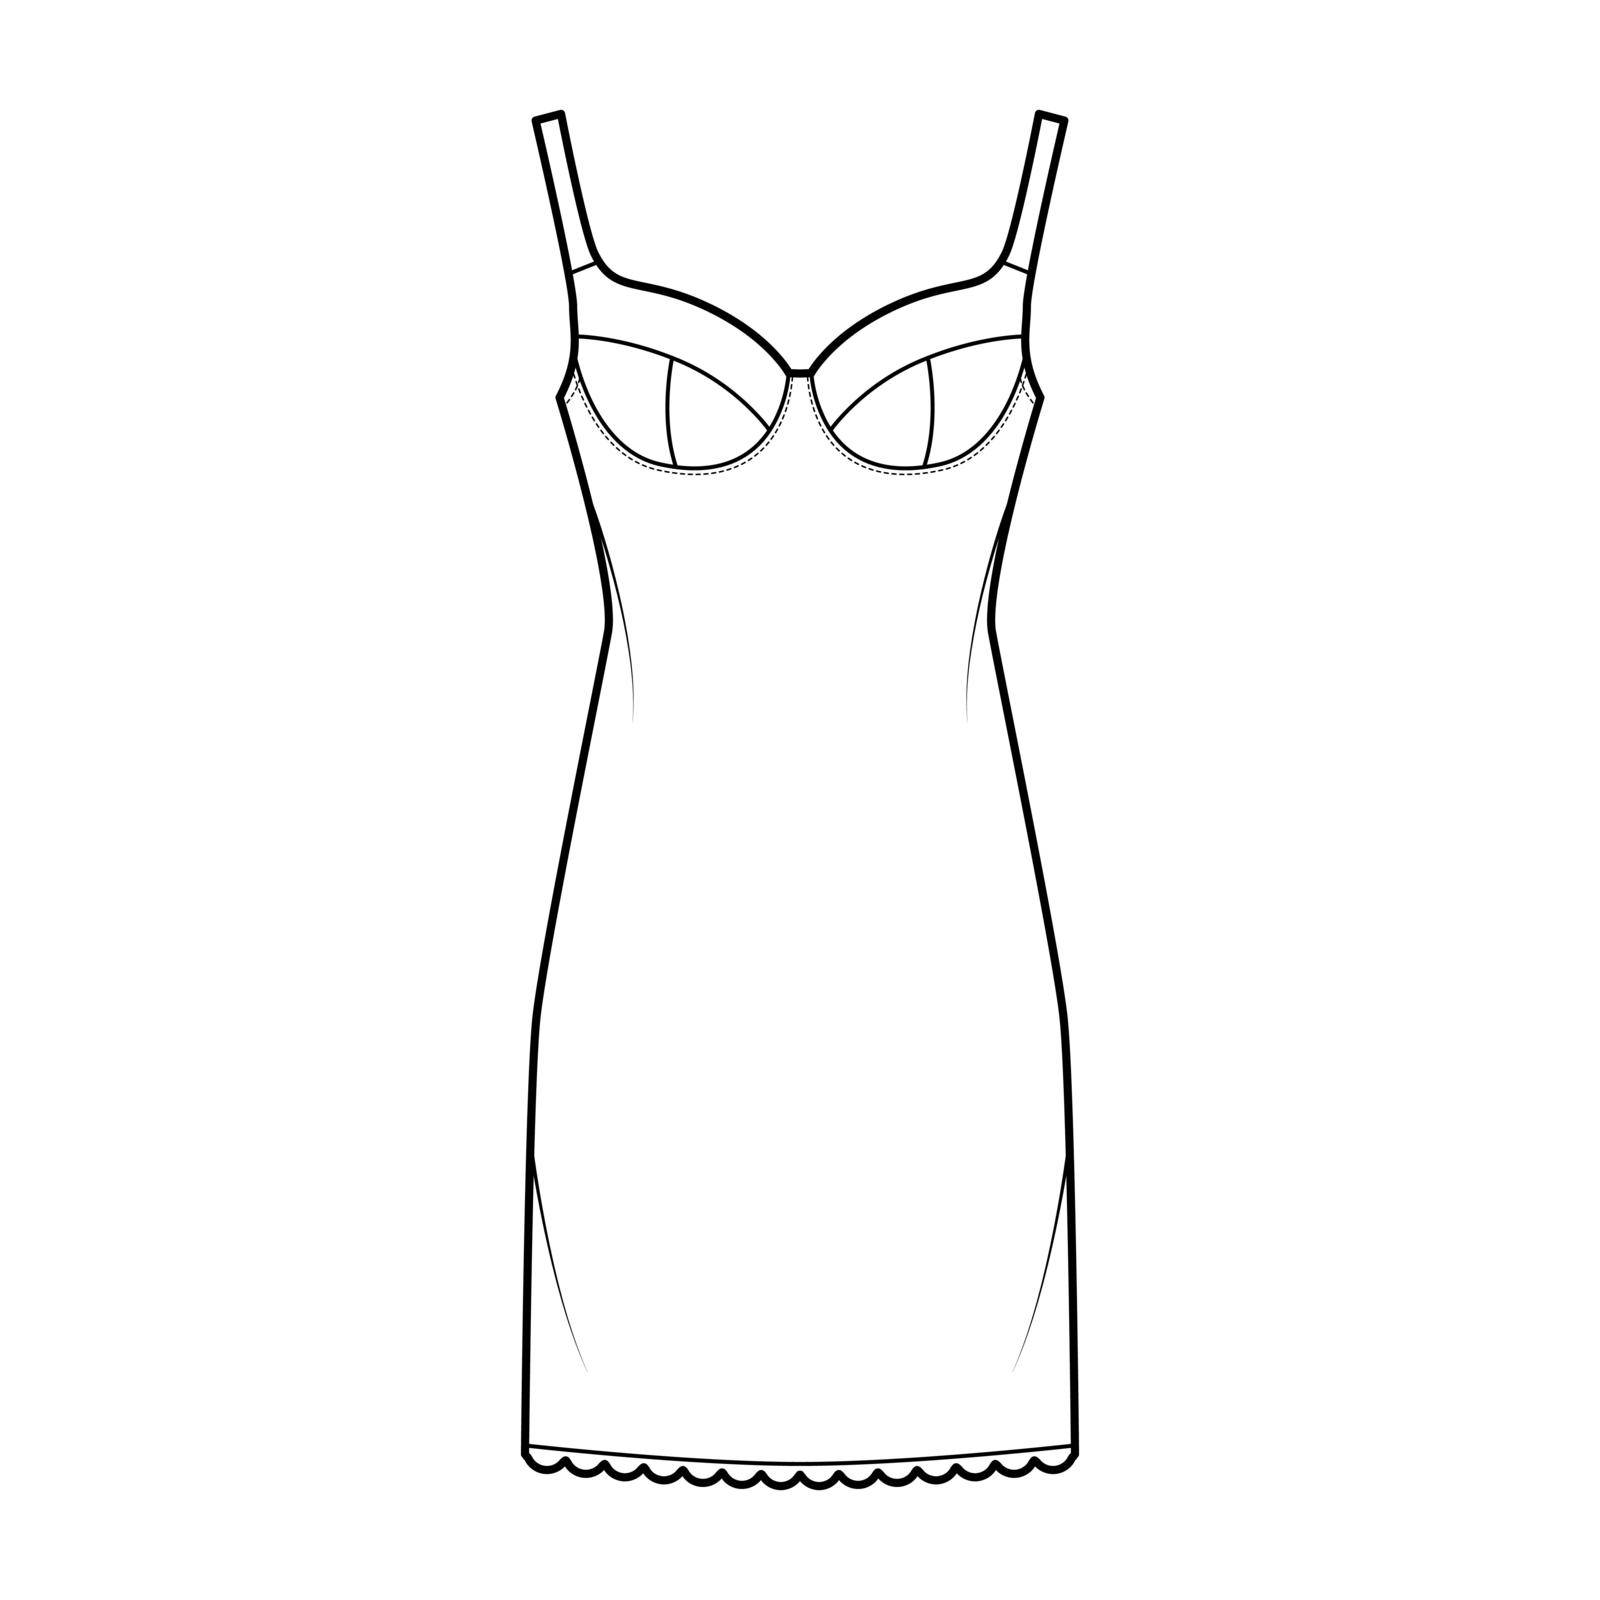 Bra slip lingerie dress technical fashion illustration with molded cup, adjustable shoulder straps, scalloped edge by Vectoressa